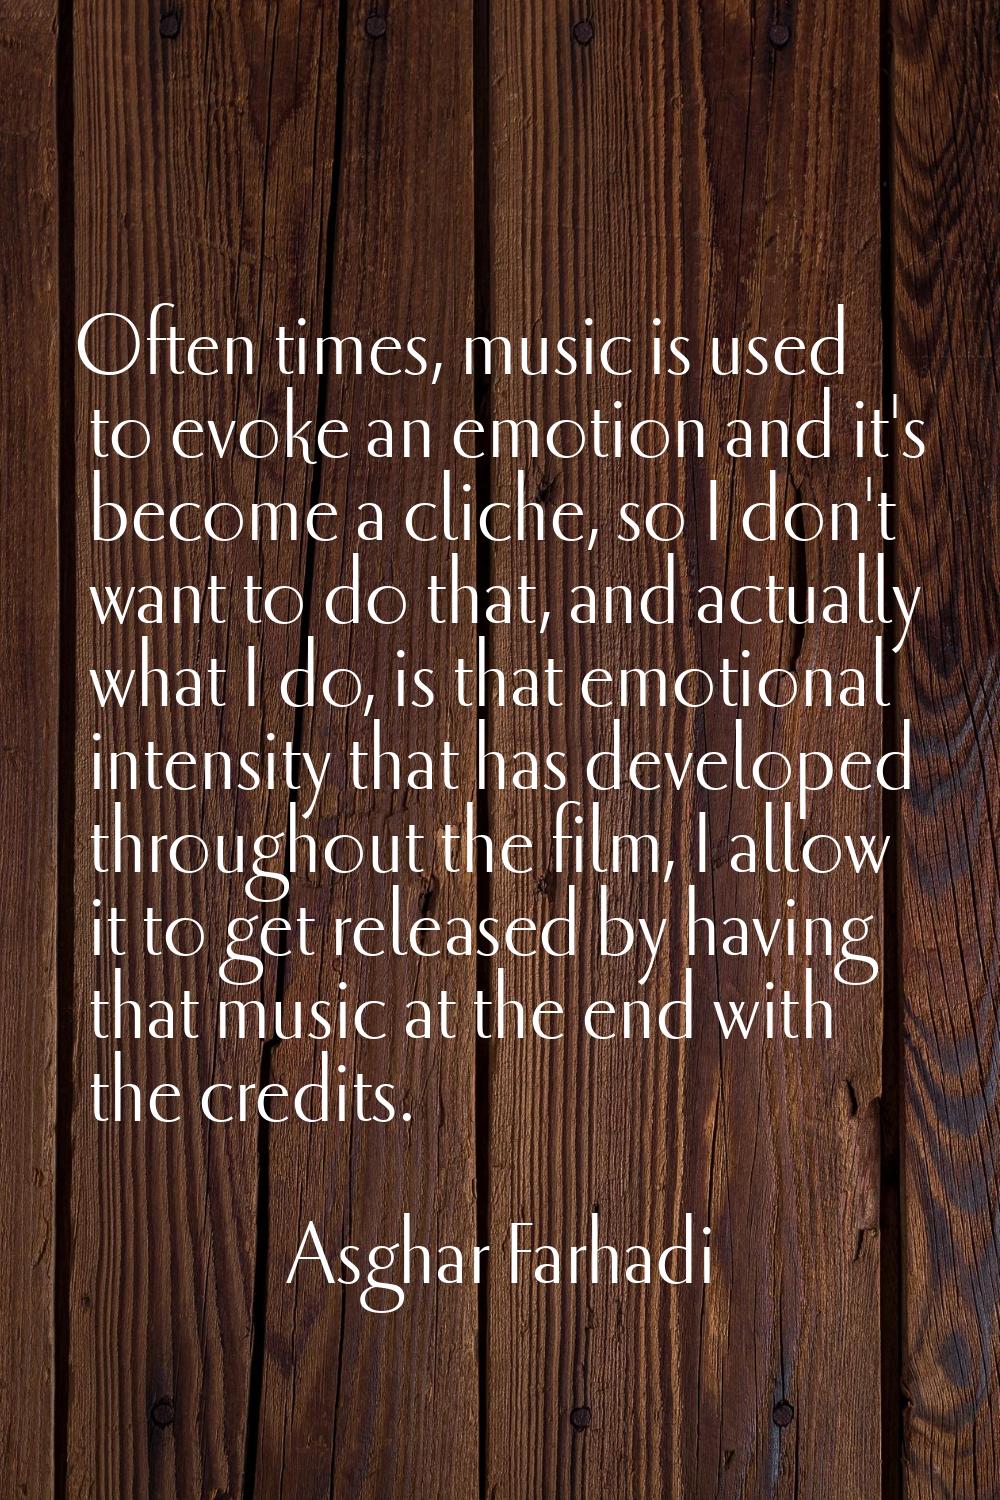 Often times, music is used to evoke an emotion and it's become a cliche, so I don't want to do that